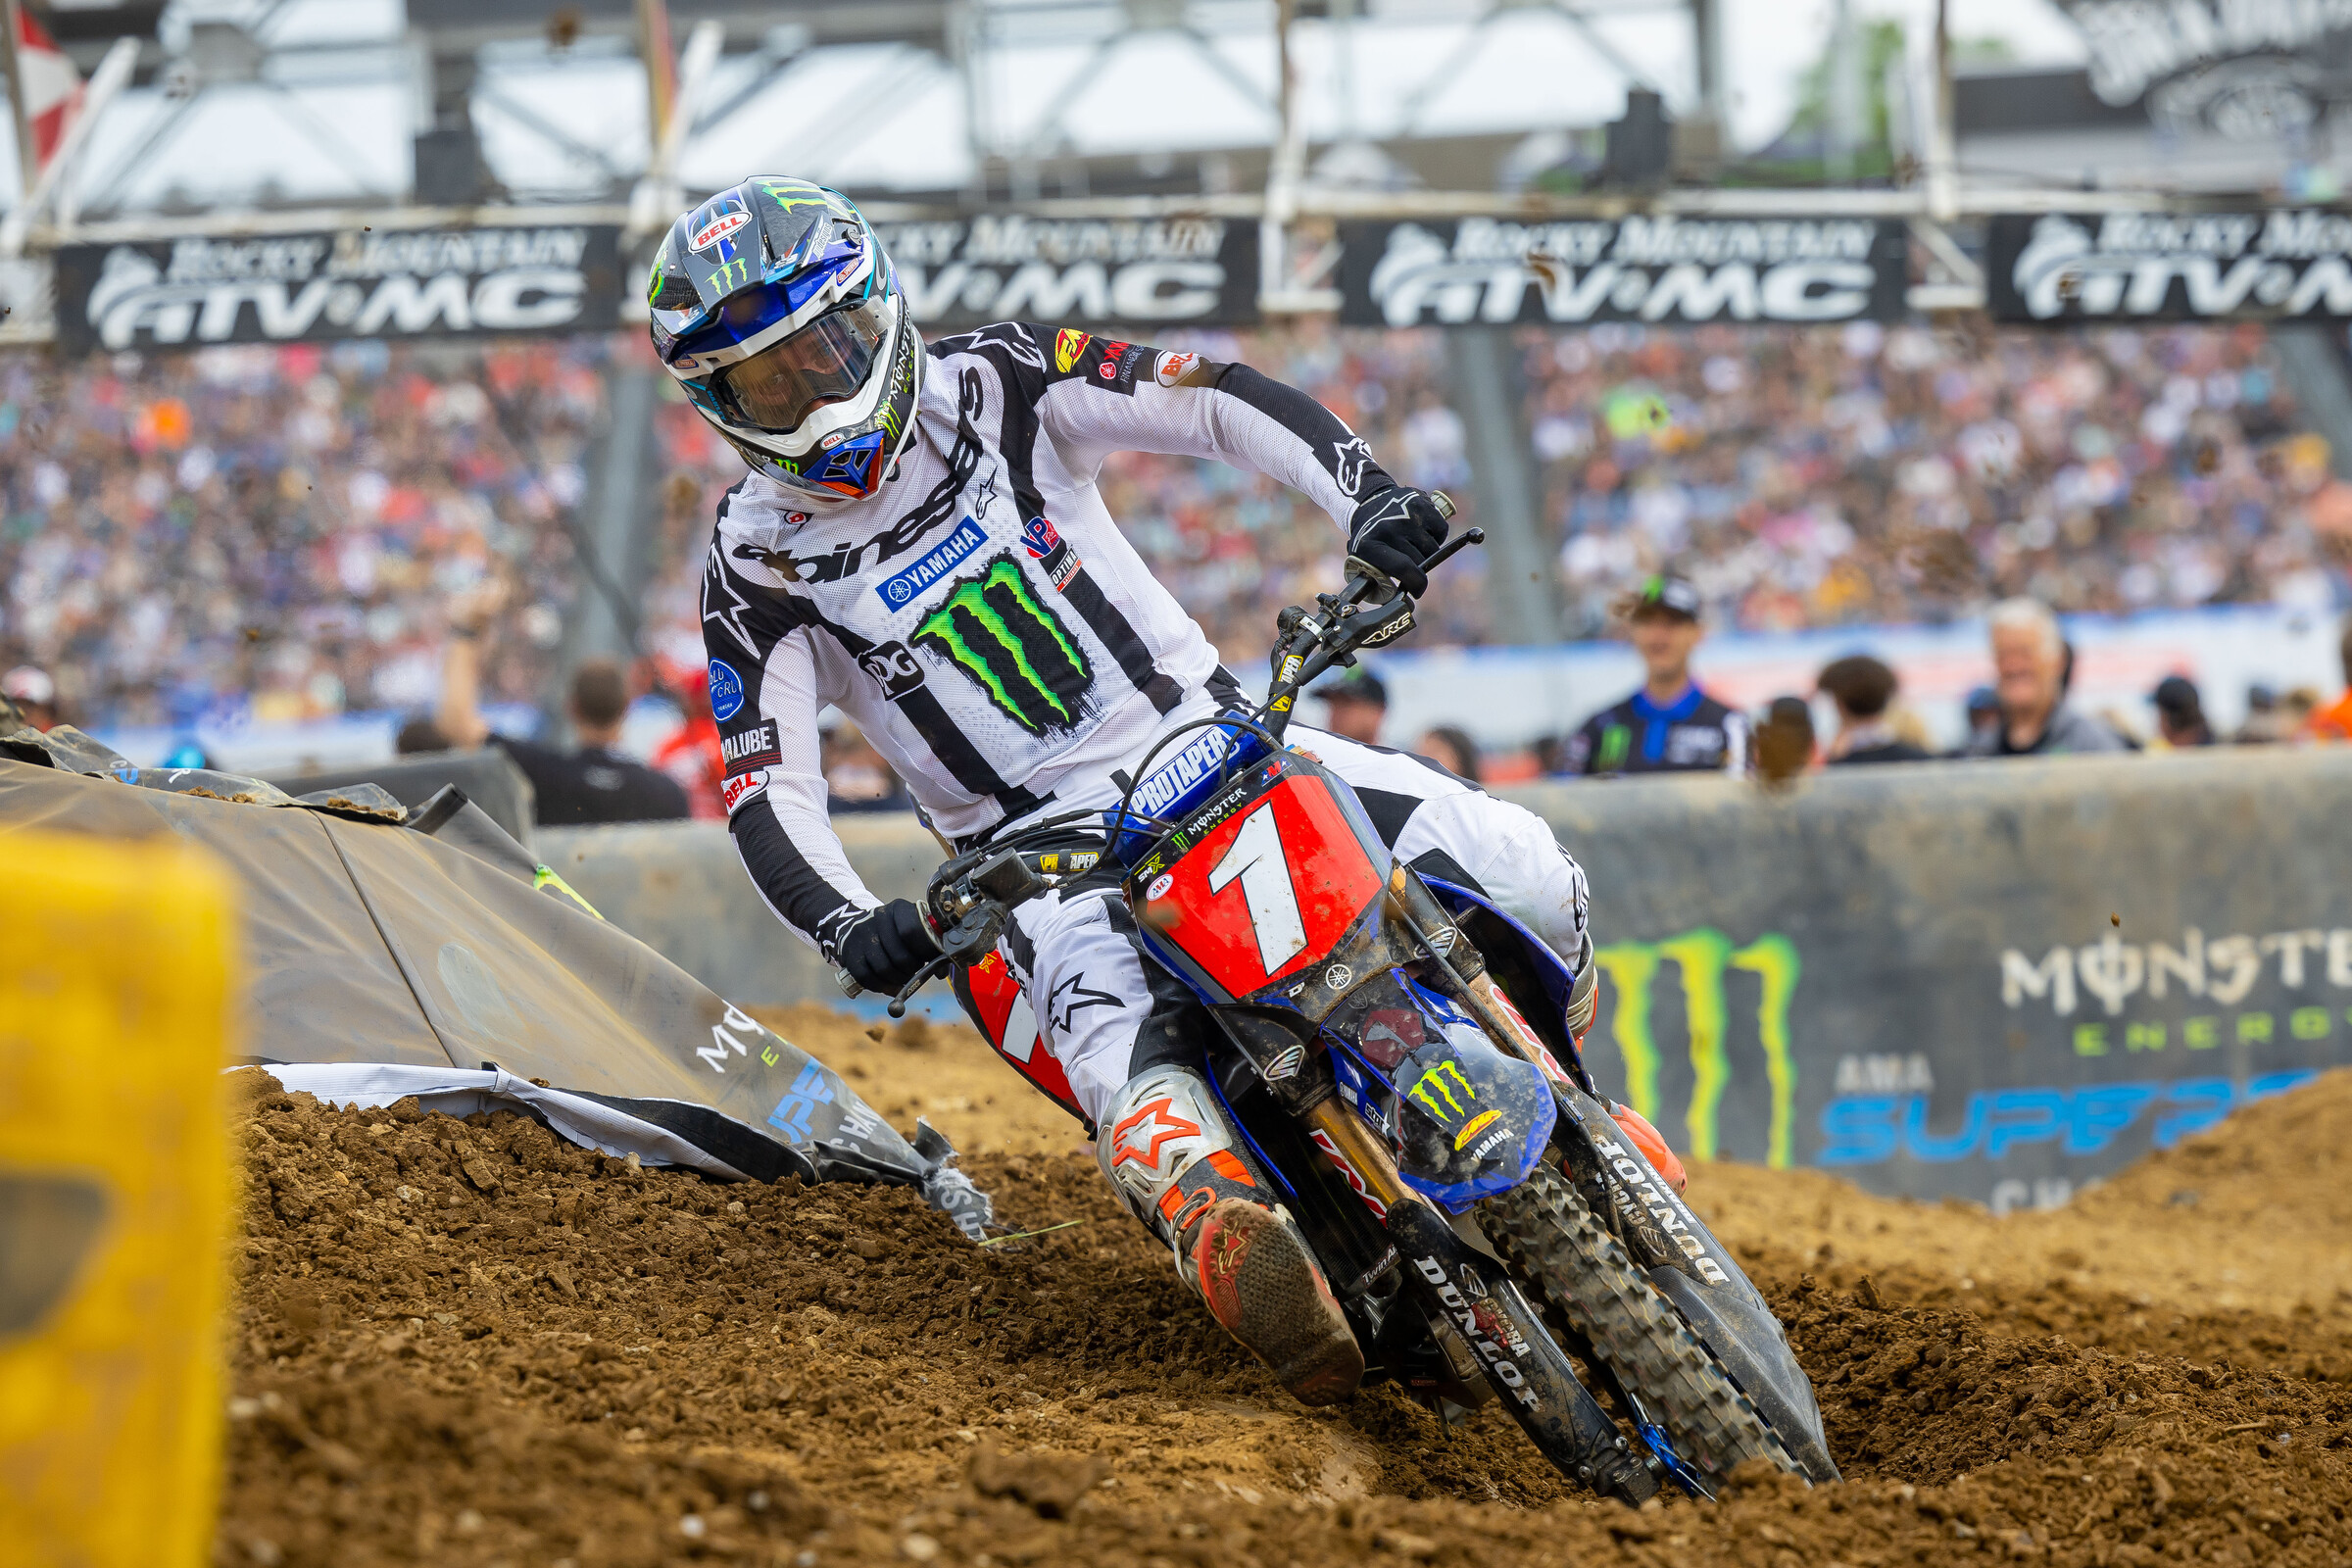 How to Watch/Stream Denver SX, Hoosier GNCC, and MXGP of Spain on TV